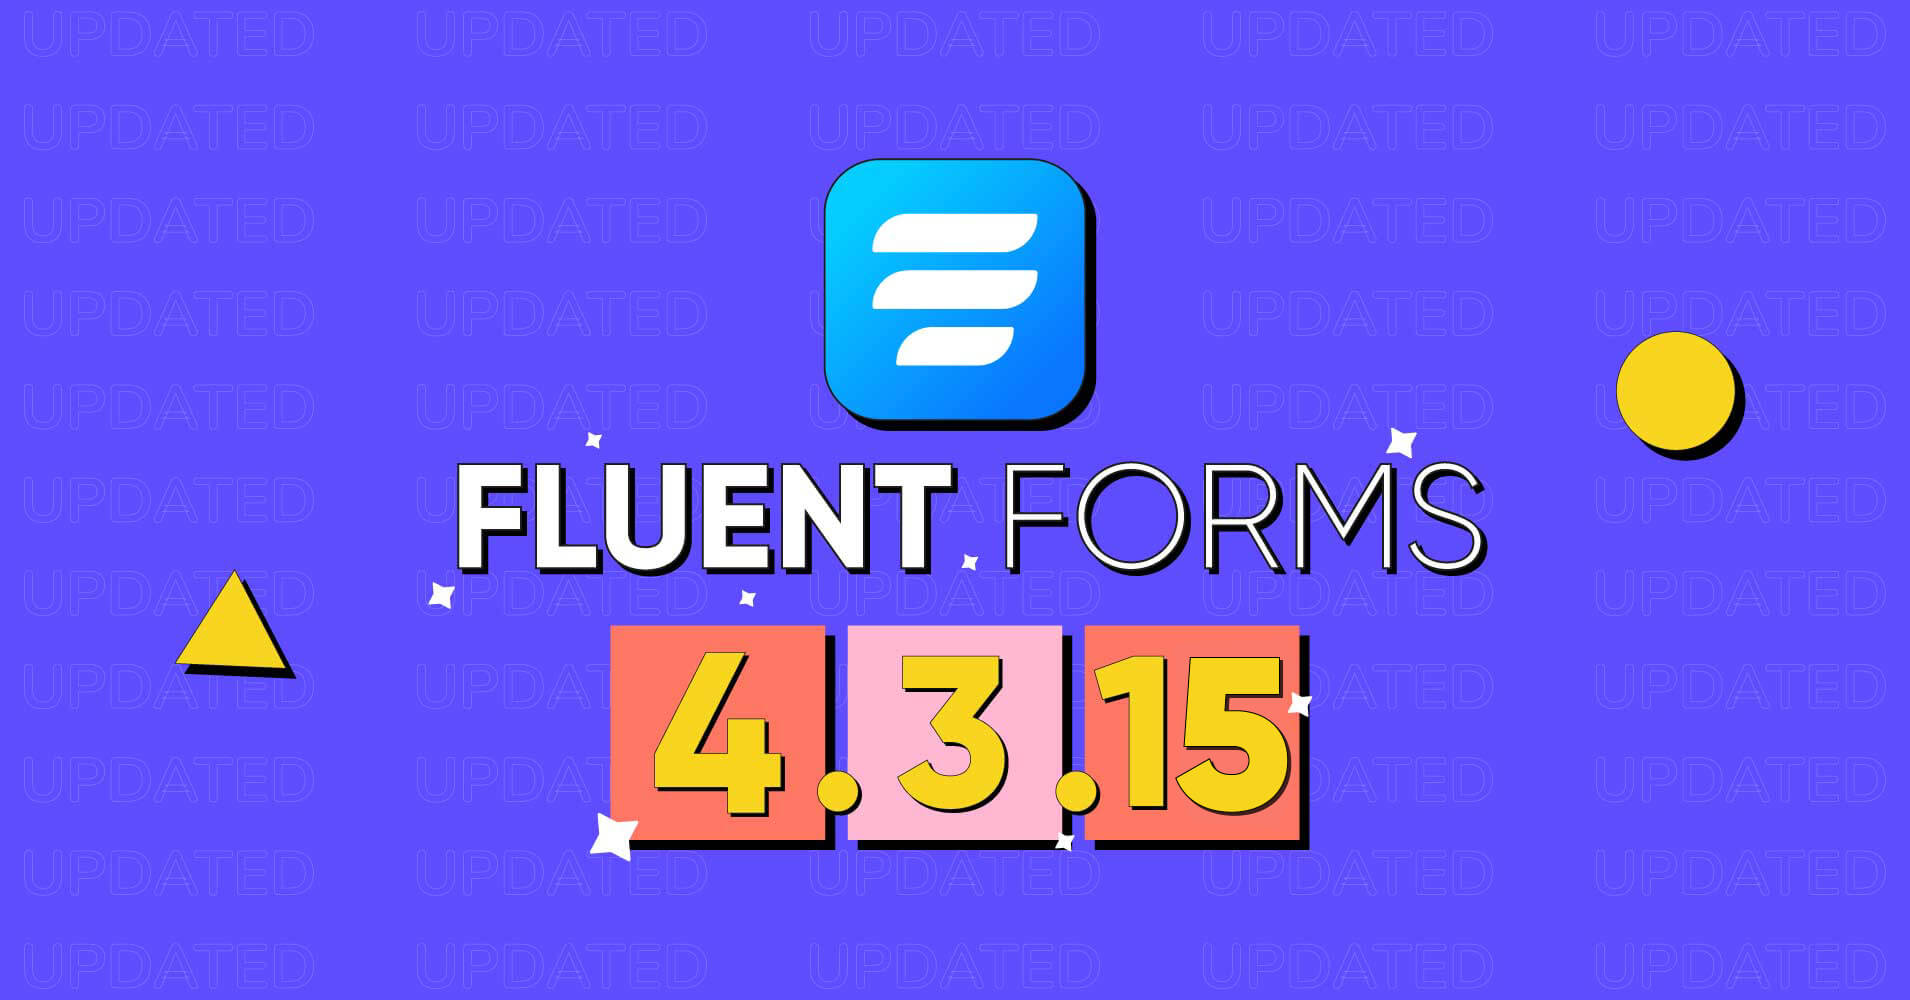 Fluent Forms 4.3.15 update release note